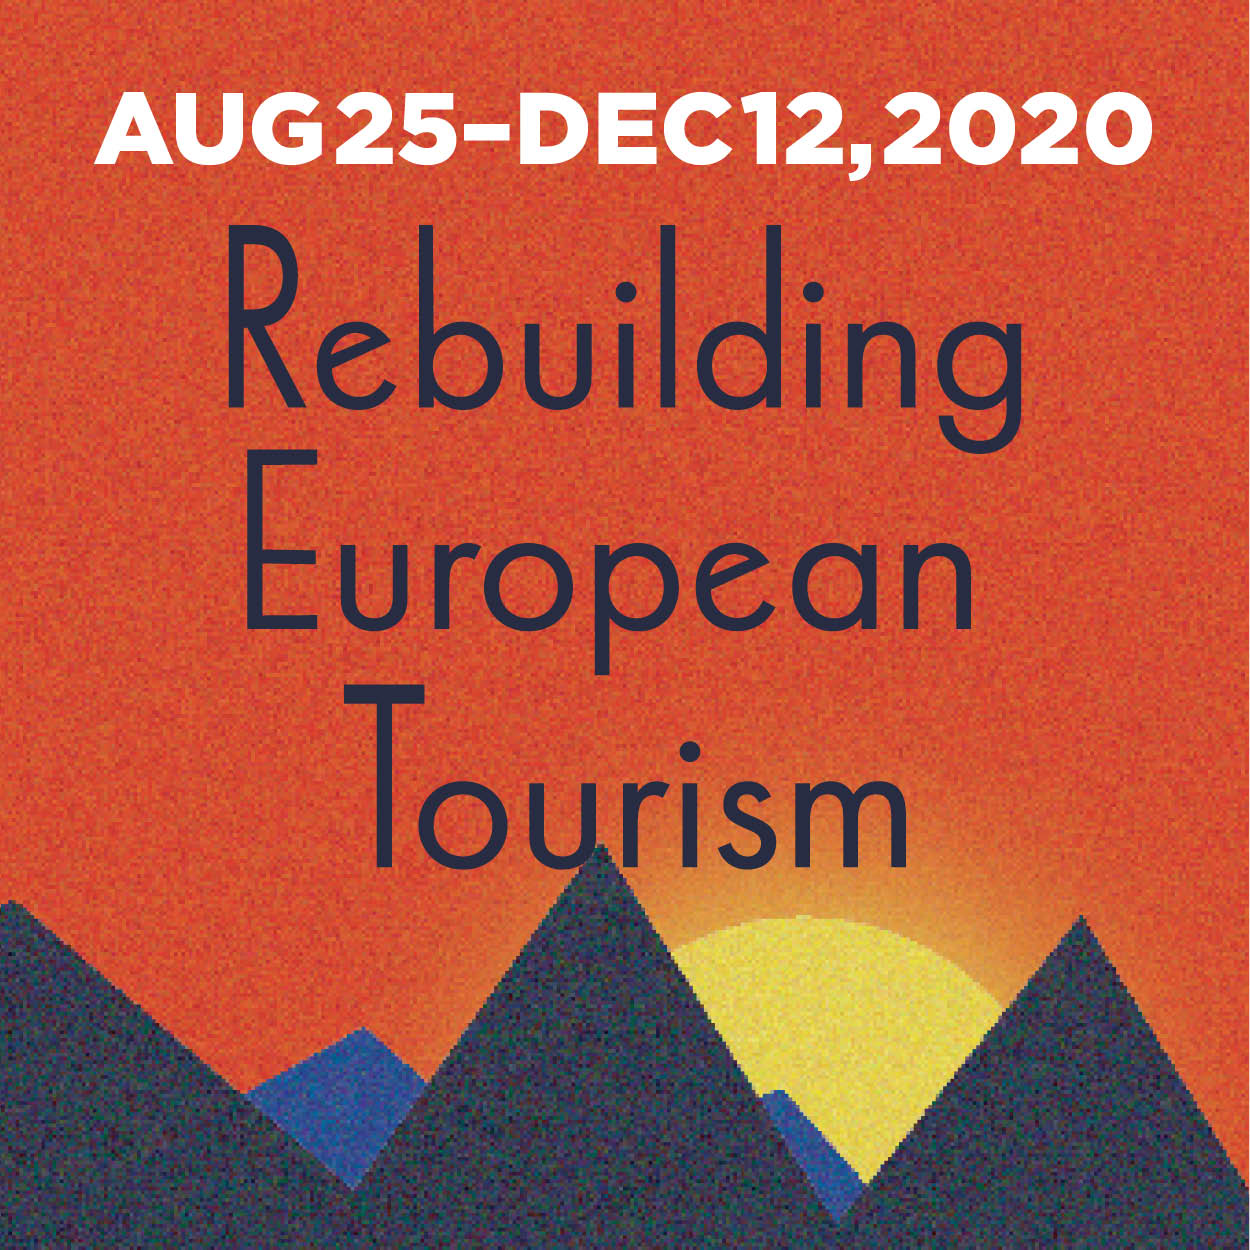 Rebuilding European Tourism: Travel Posters and the World Wars August 25-December 12, 2020